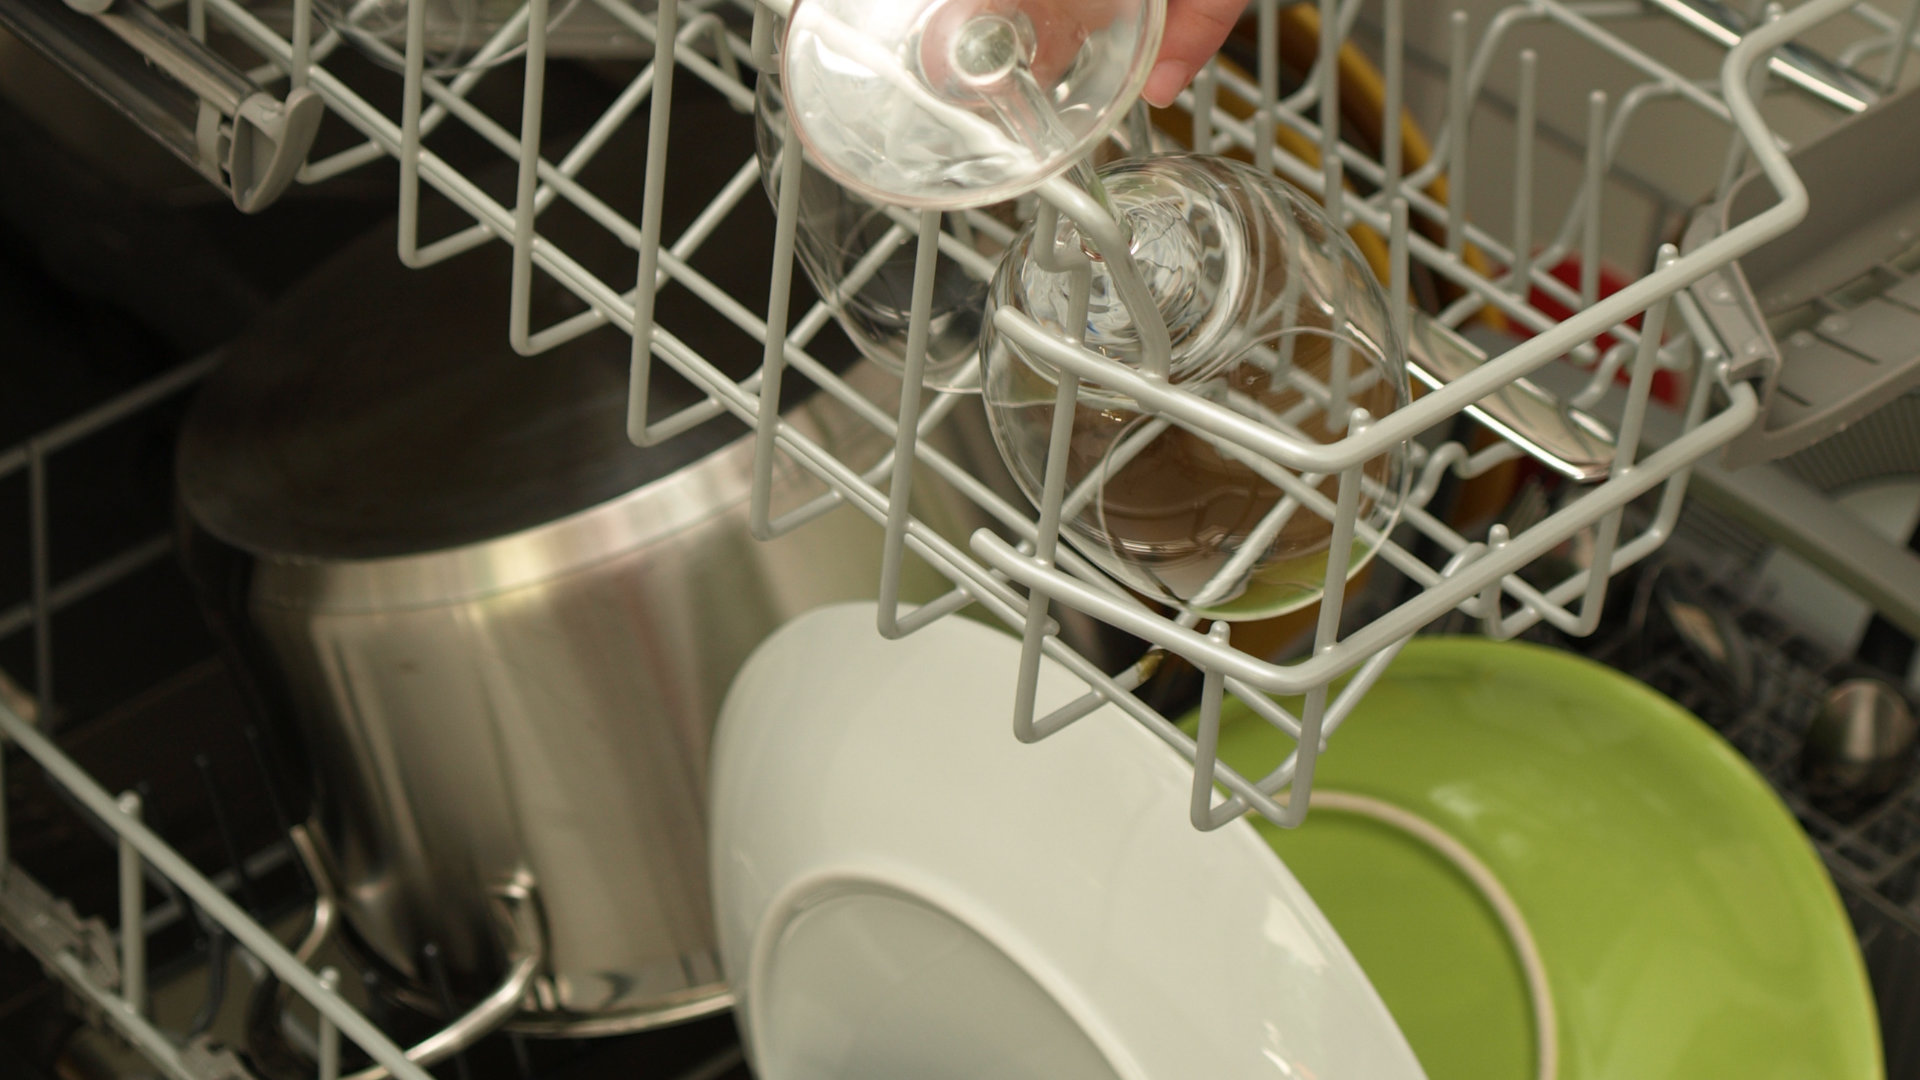 Featured image for “Dishwasher Not Draining Properly? The Causes and Solutions”